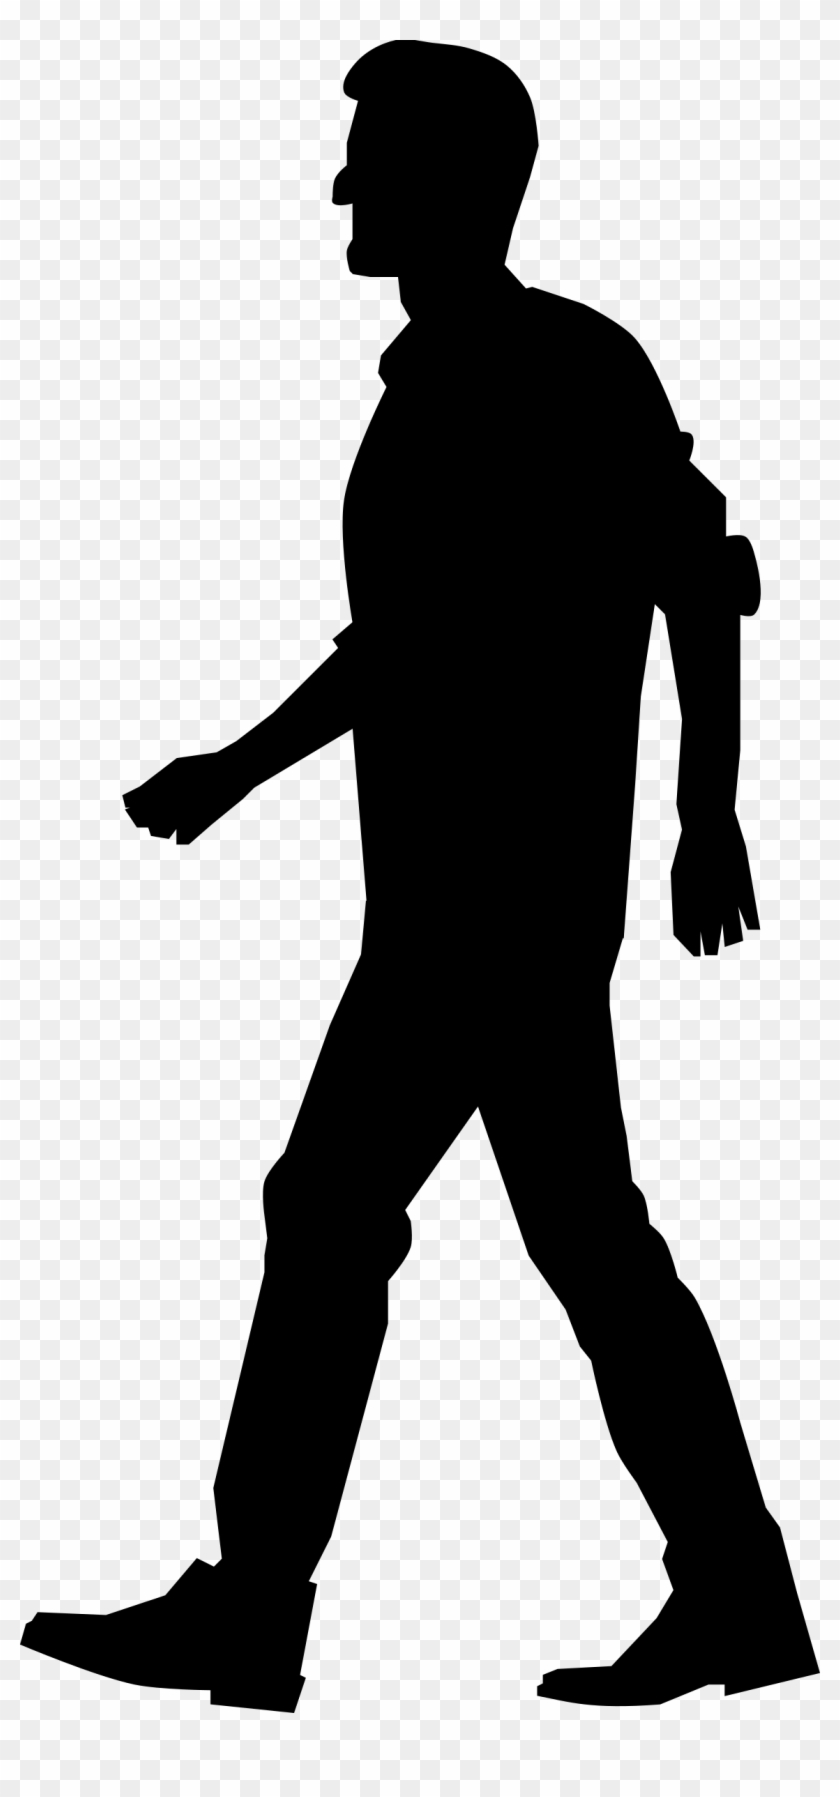 Clipart - Human Silhouette Walking Png - Free Transparent PNG Clipart ...